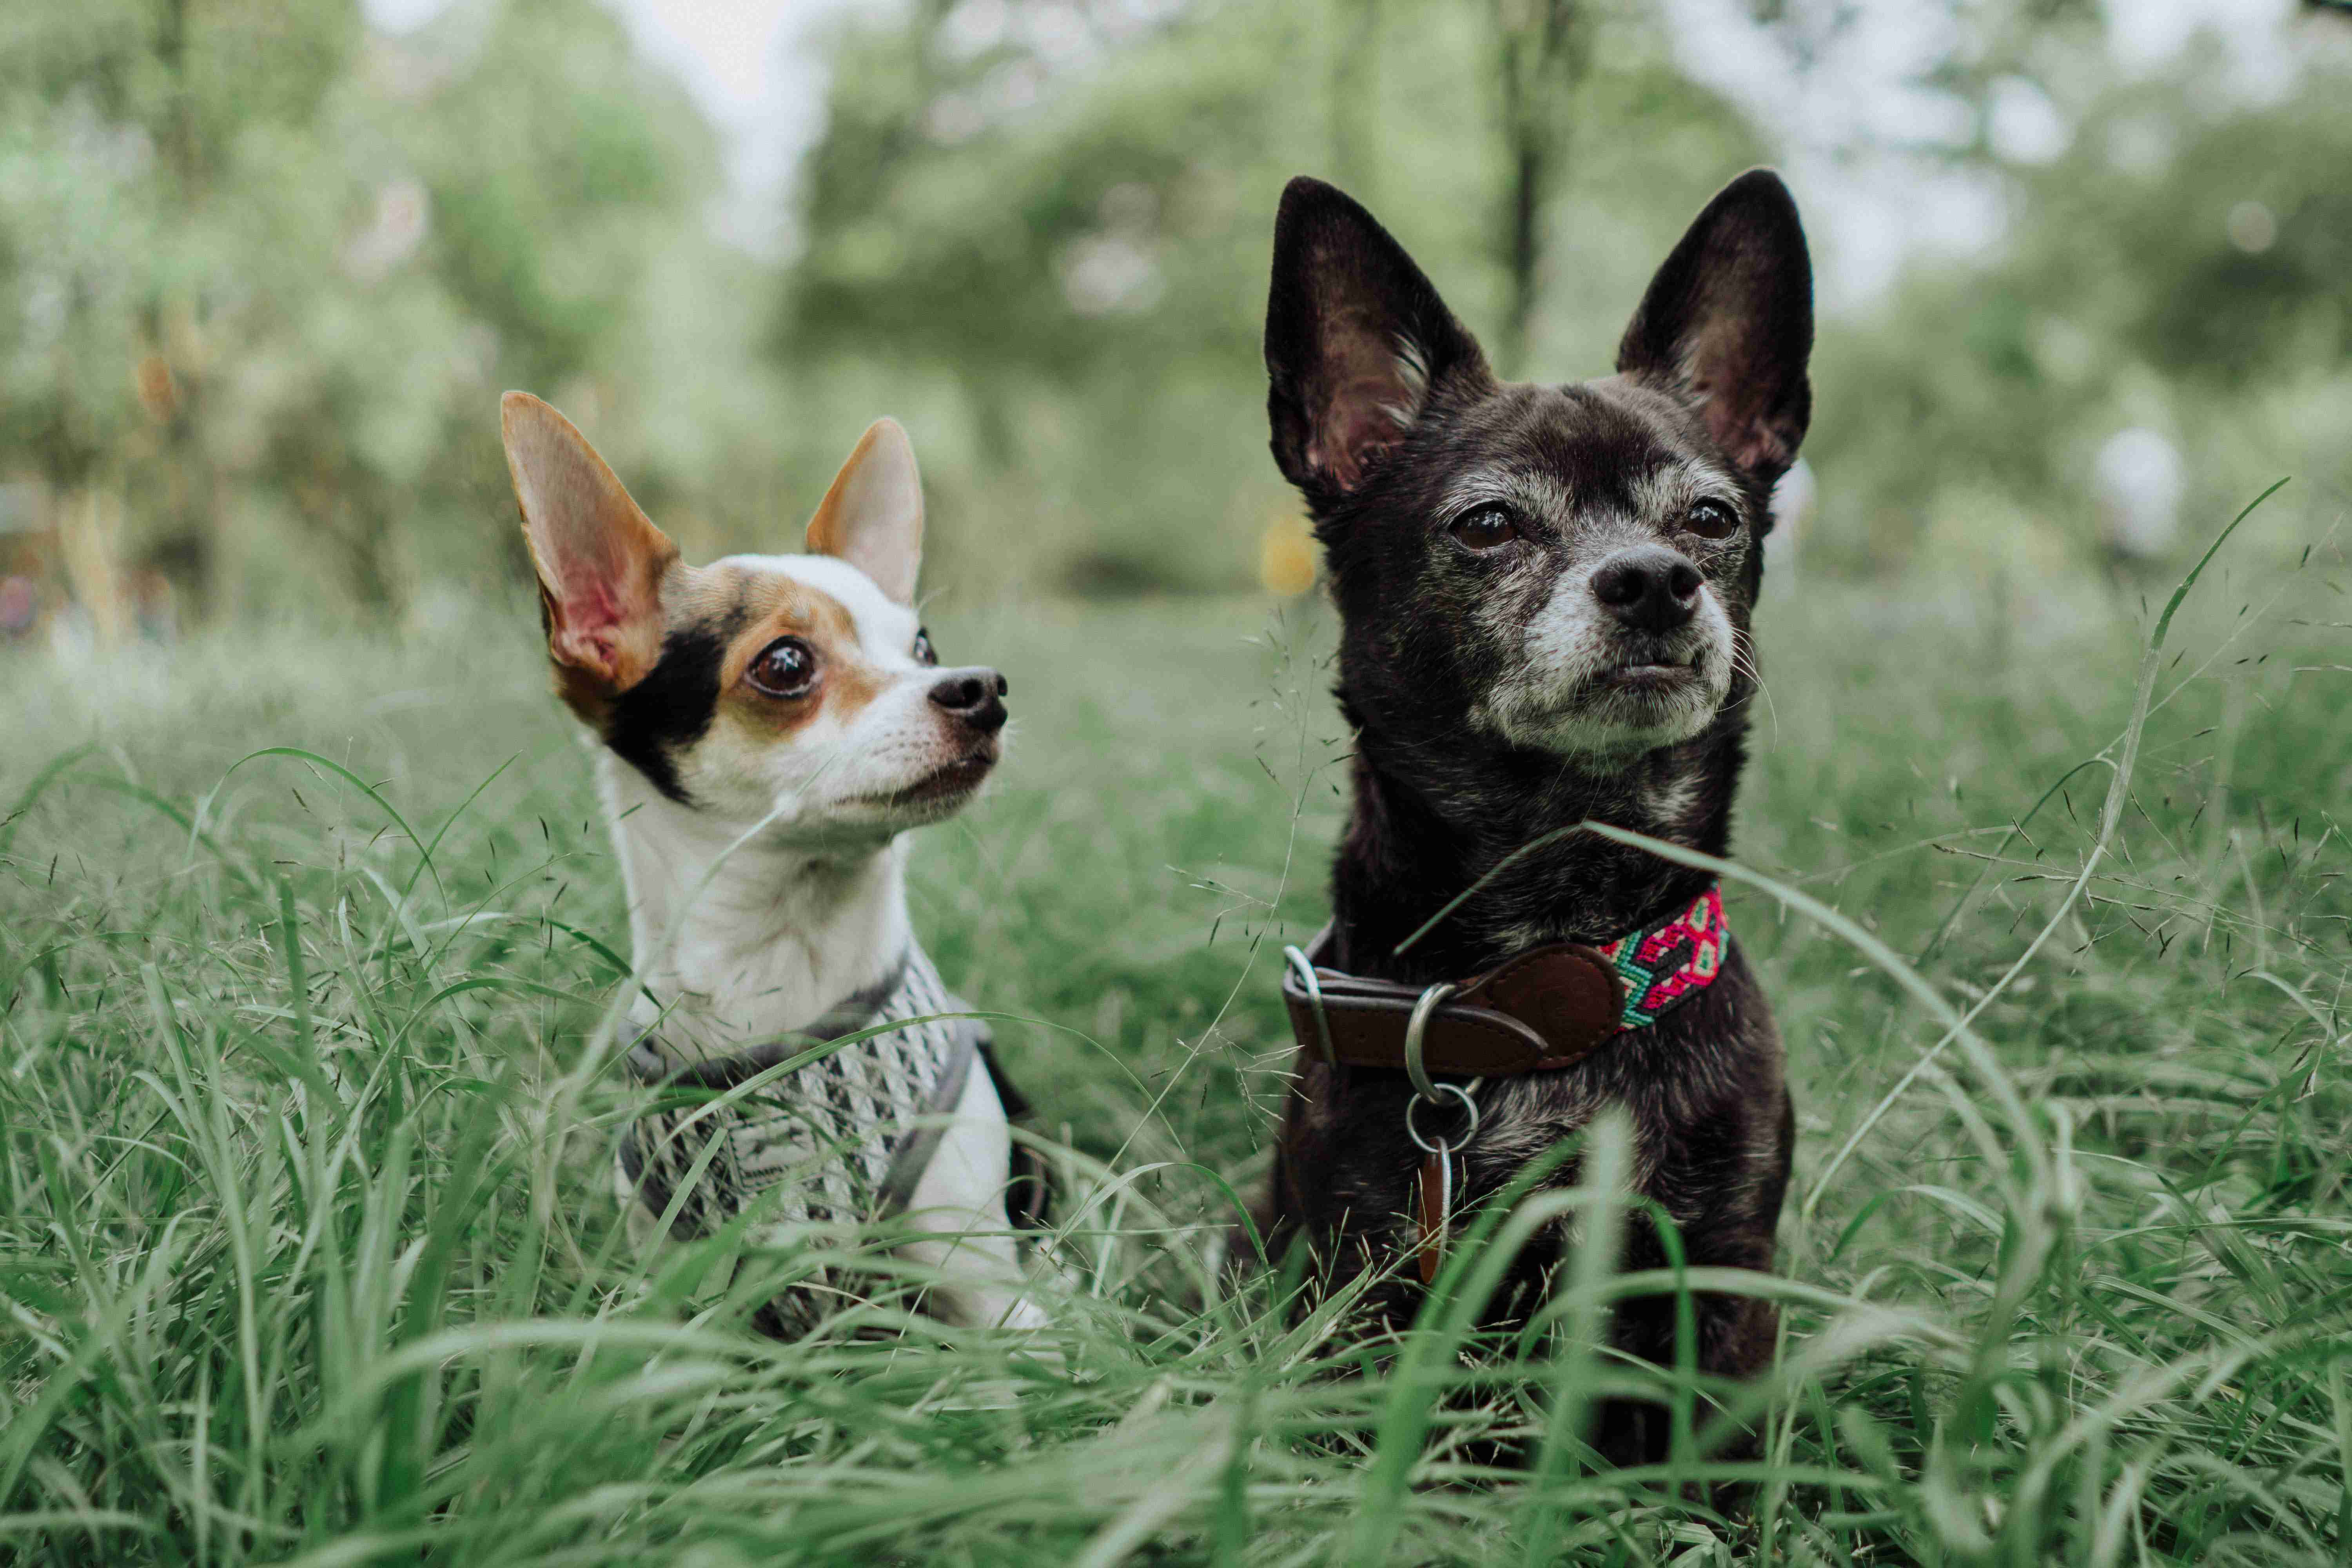 What are some steps you can take to prevent Chihuahua aggression from escalating into a dangerous situation?